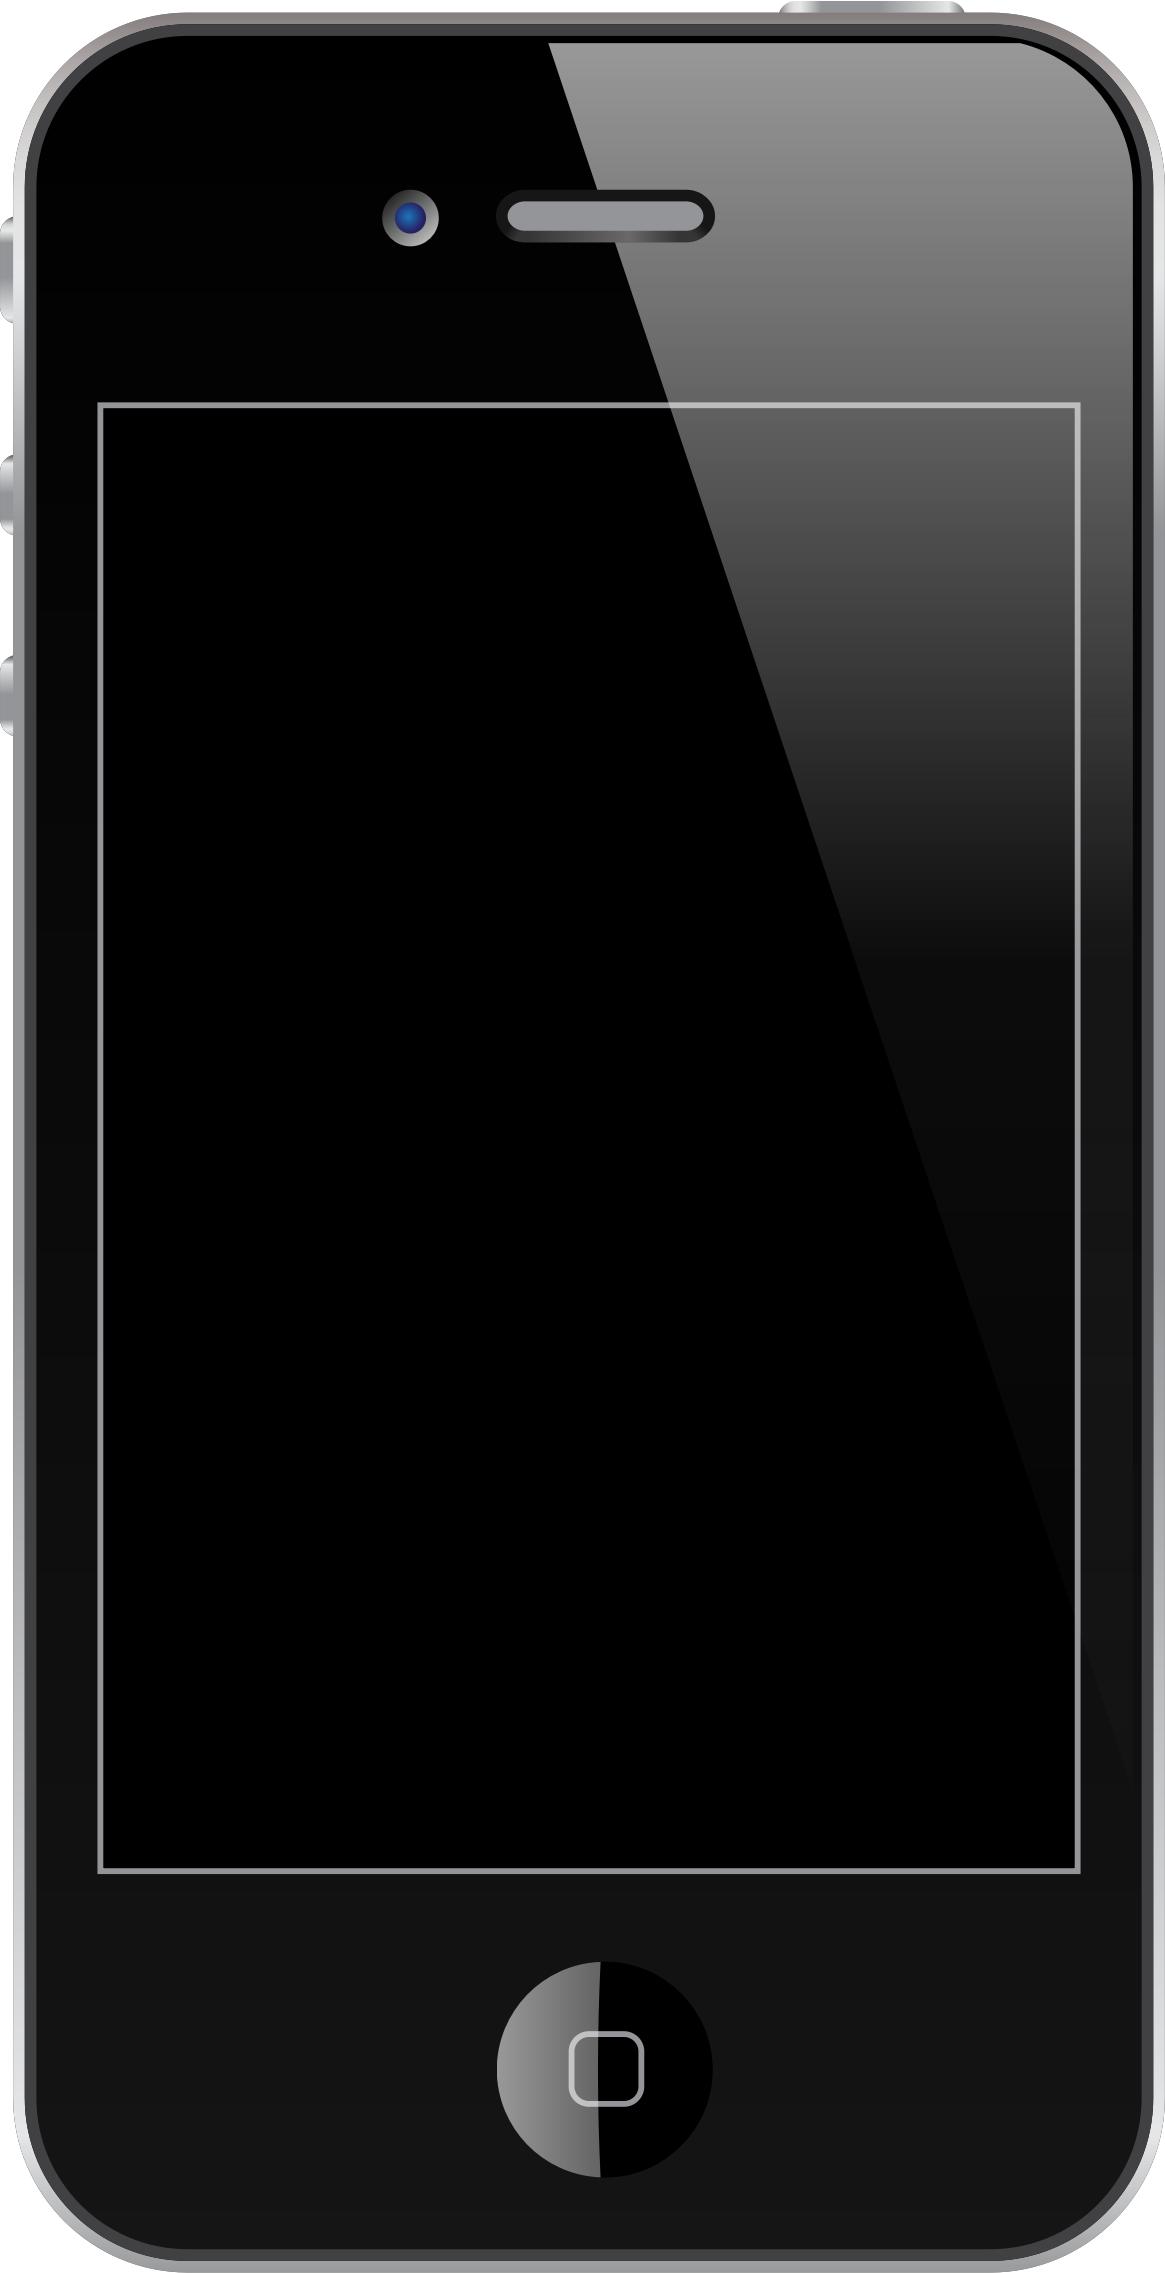 iPhone 4/4S png